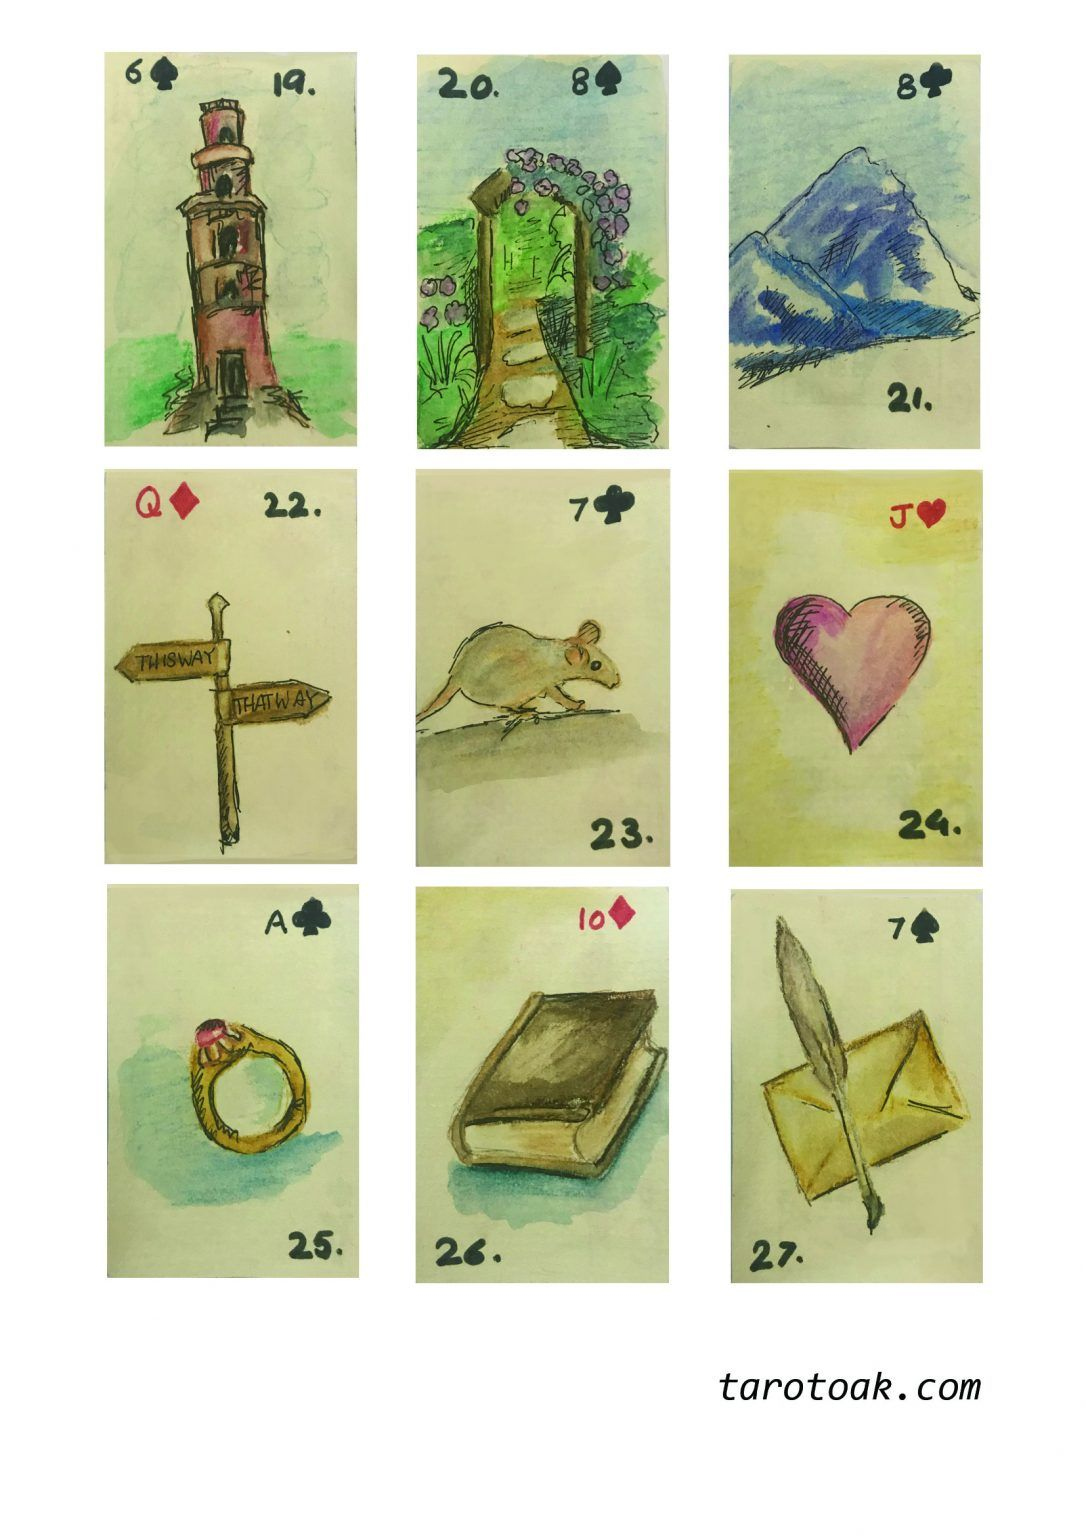 Free Printable Deck Of Lenormand Cards | Tarot Oak | Free Tarot inside Free Printable Lenormand Cards